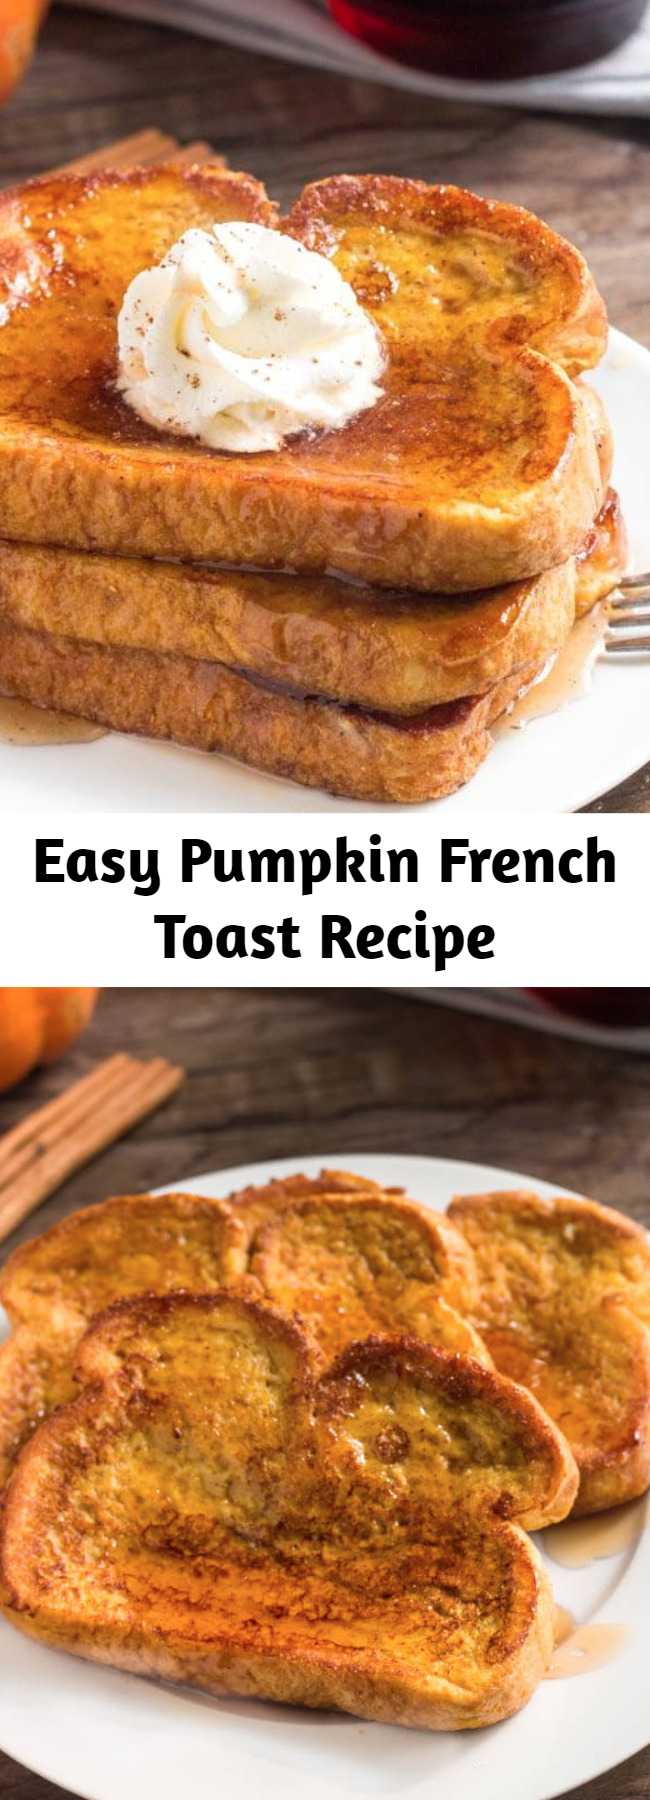 Easy Pumpkin French Toast Recipe - French toast that’s perfect easy, breakfast for fall! This Pumpkin French Toast is extra fluffy, filled with pumpkin spice & tastes amazing drizzled in maple syrup. #fall #pumpkin #pumpkinspice #frenchtoast